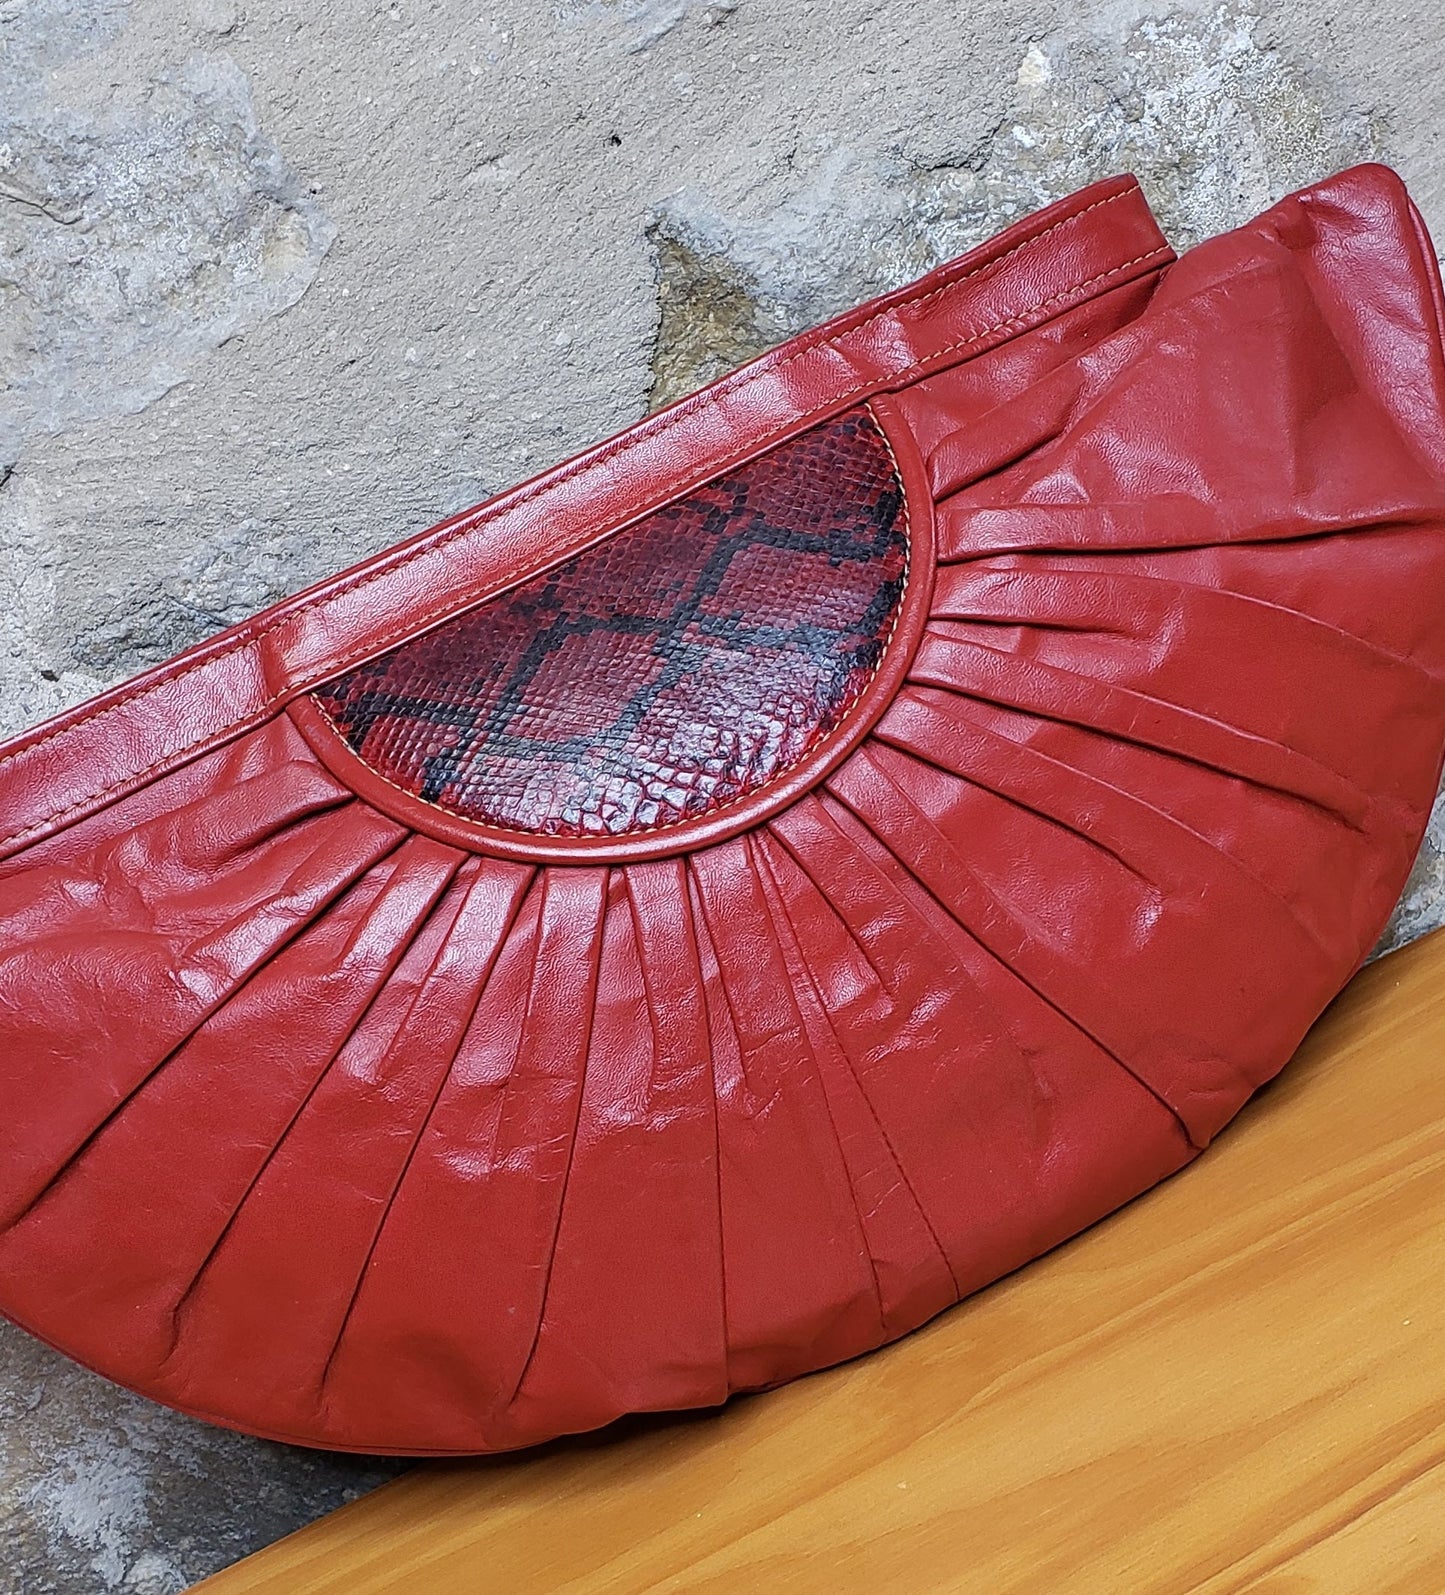 Vintage Red Leather Purse